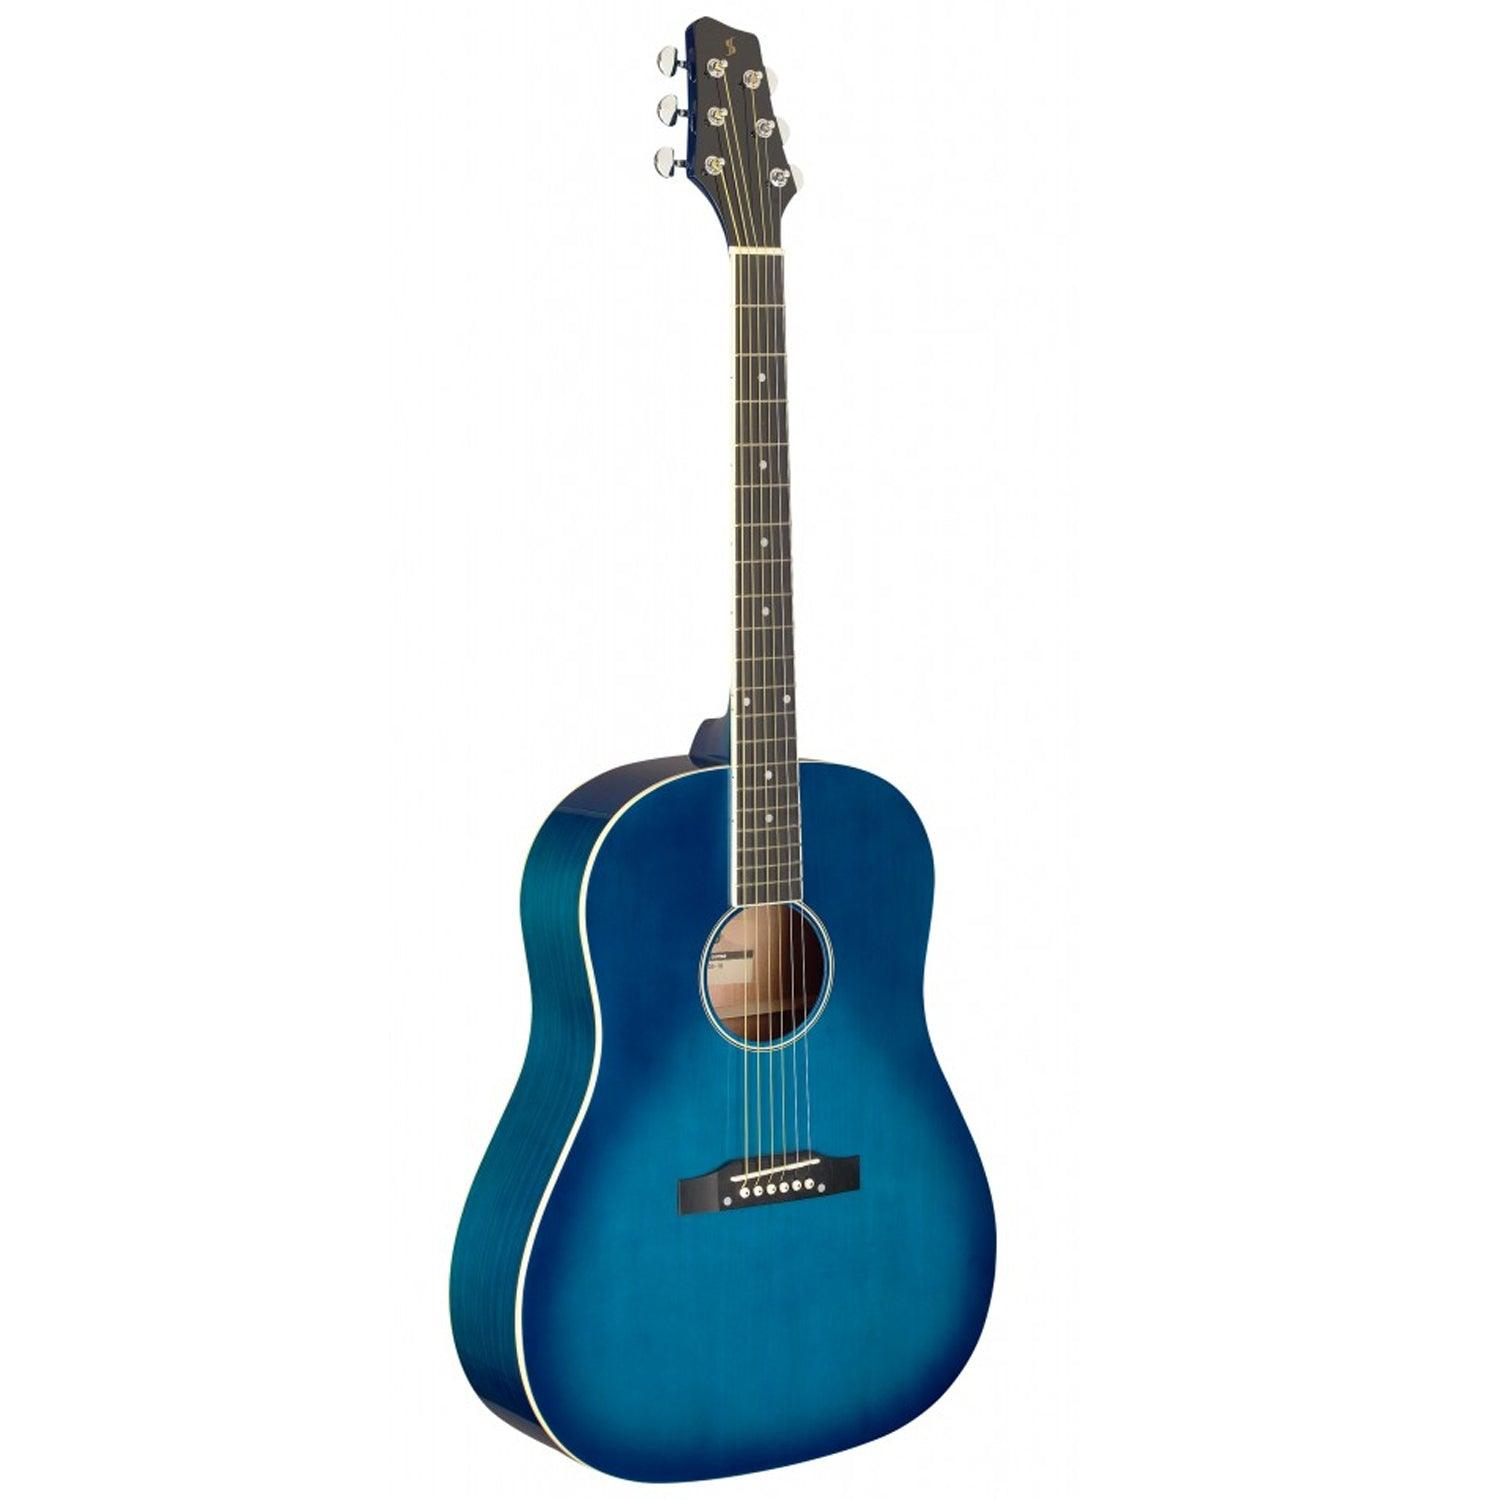 Stagg SA35 DS-TB Blue Slope Shoulder Dreadnought Guitar - DY Pro Audio